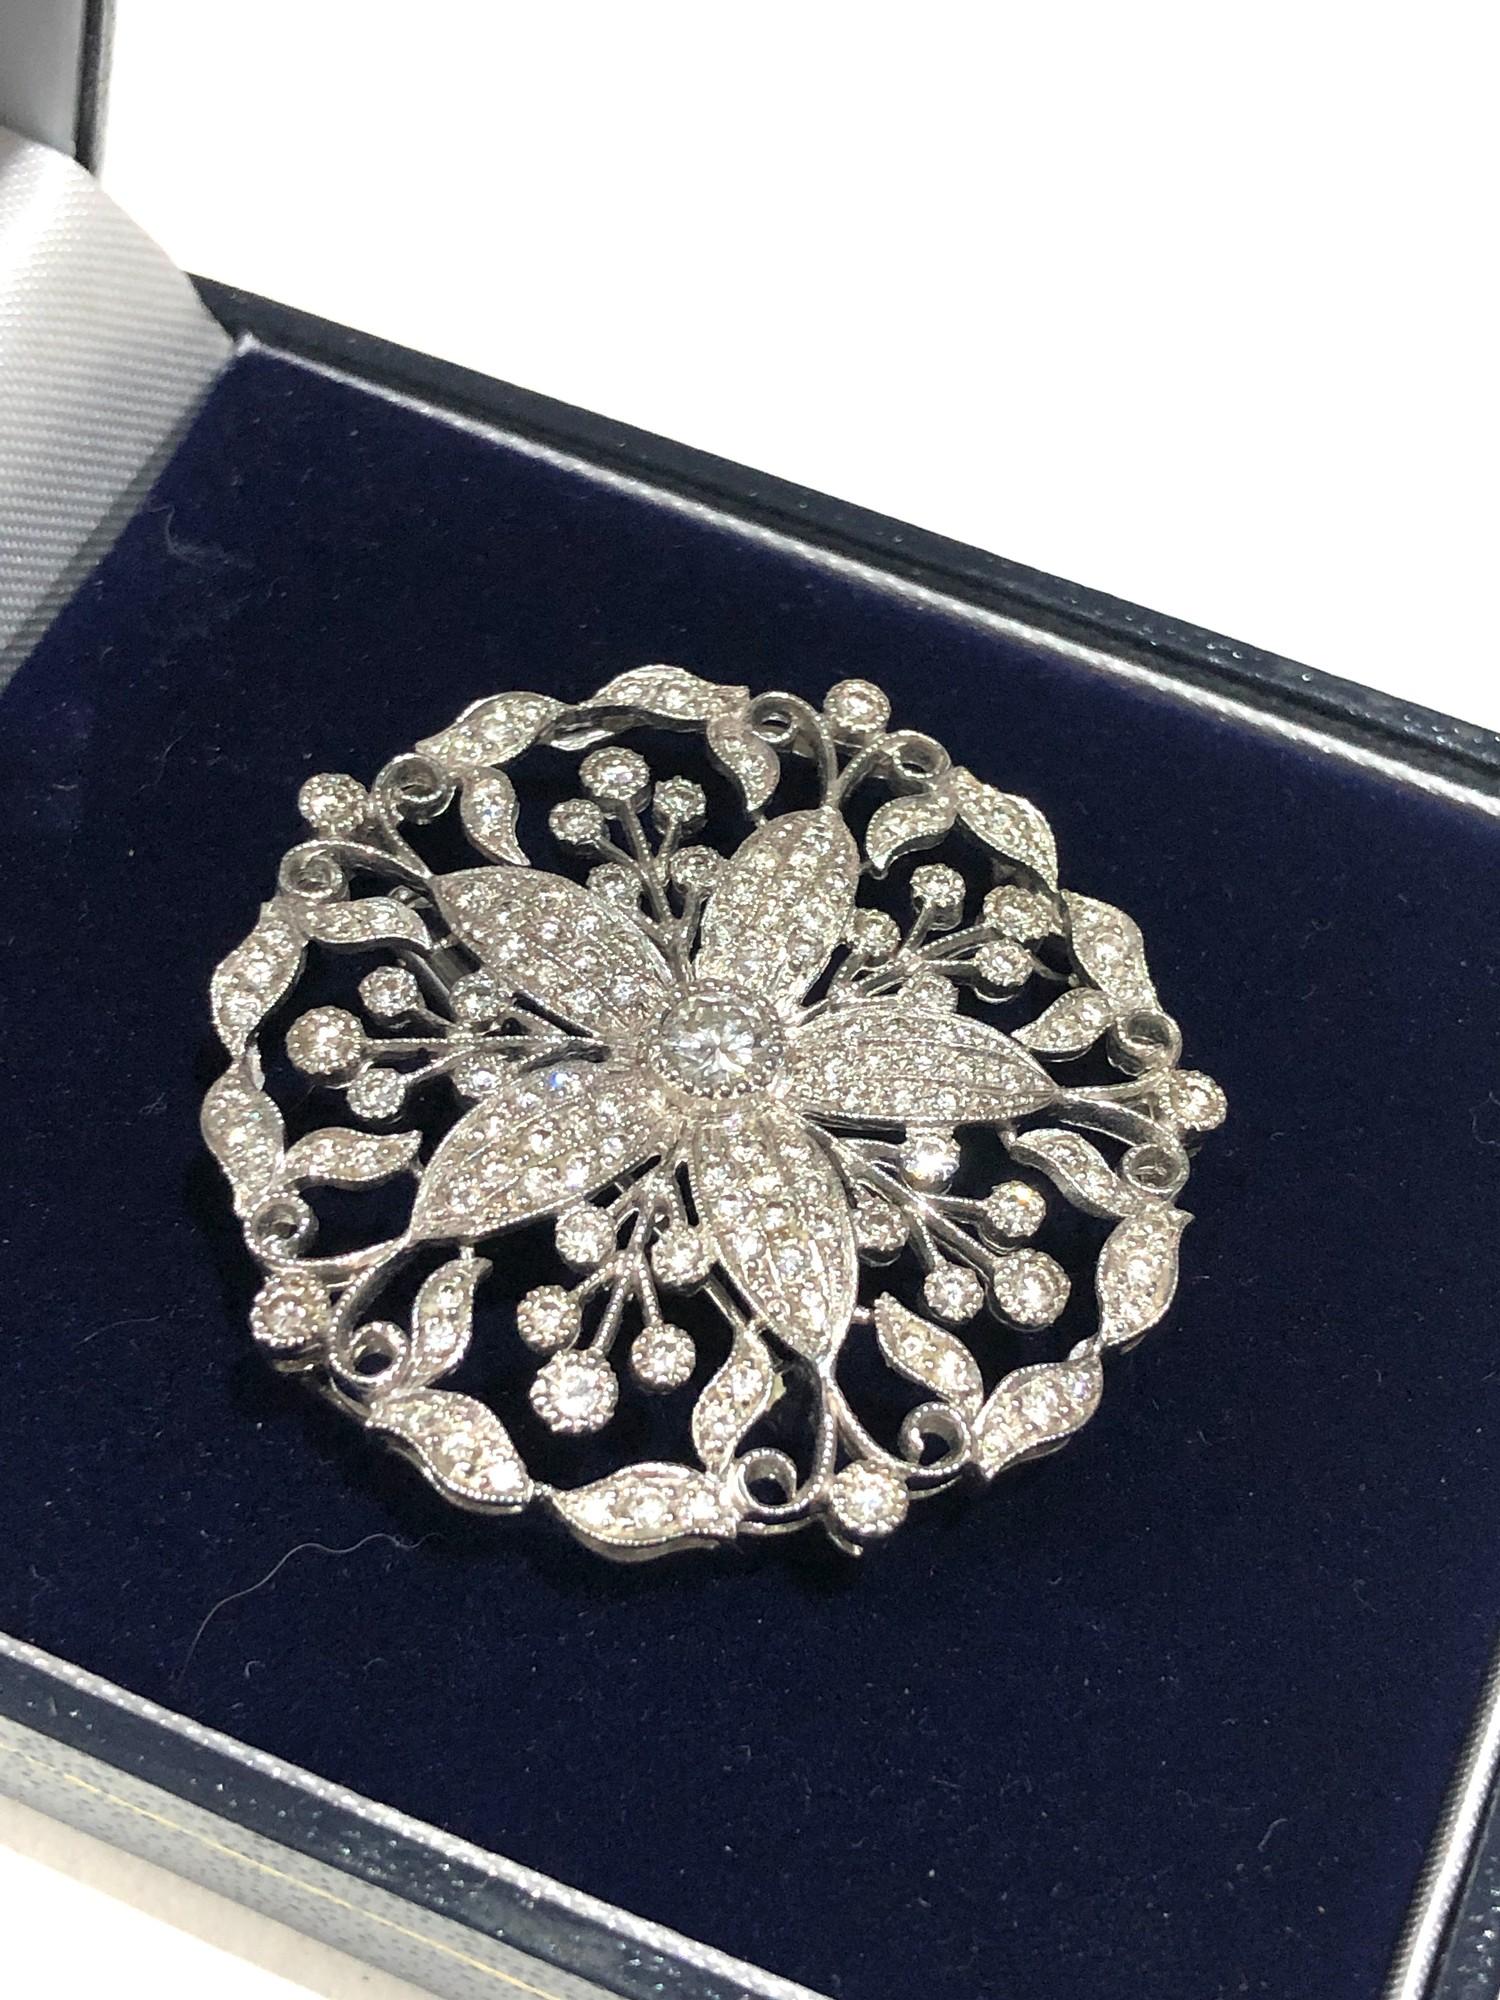 Fine antique white gold / plat floral diamond pendant pin brooch central diamond measures approx 4mm - Image 2 of 5